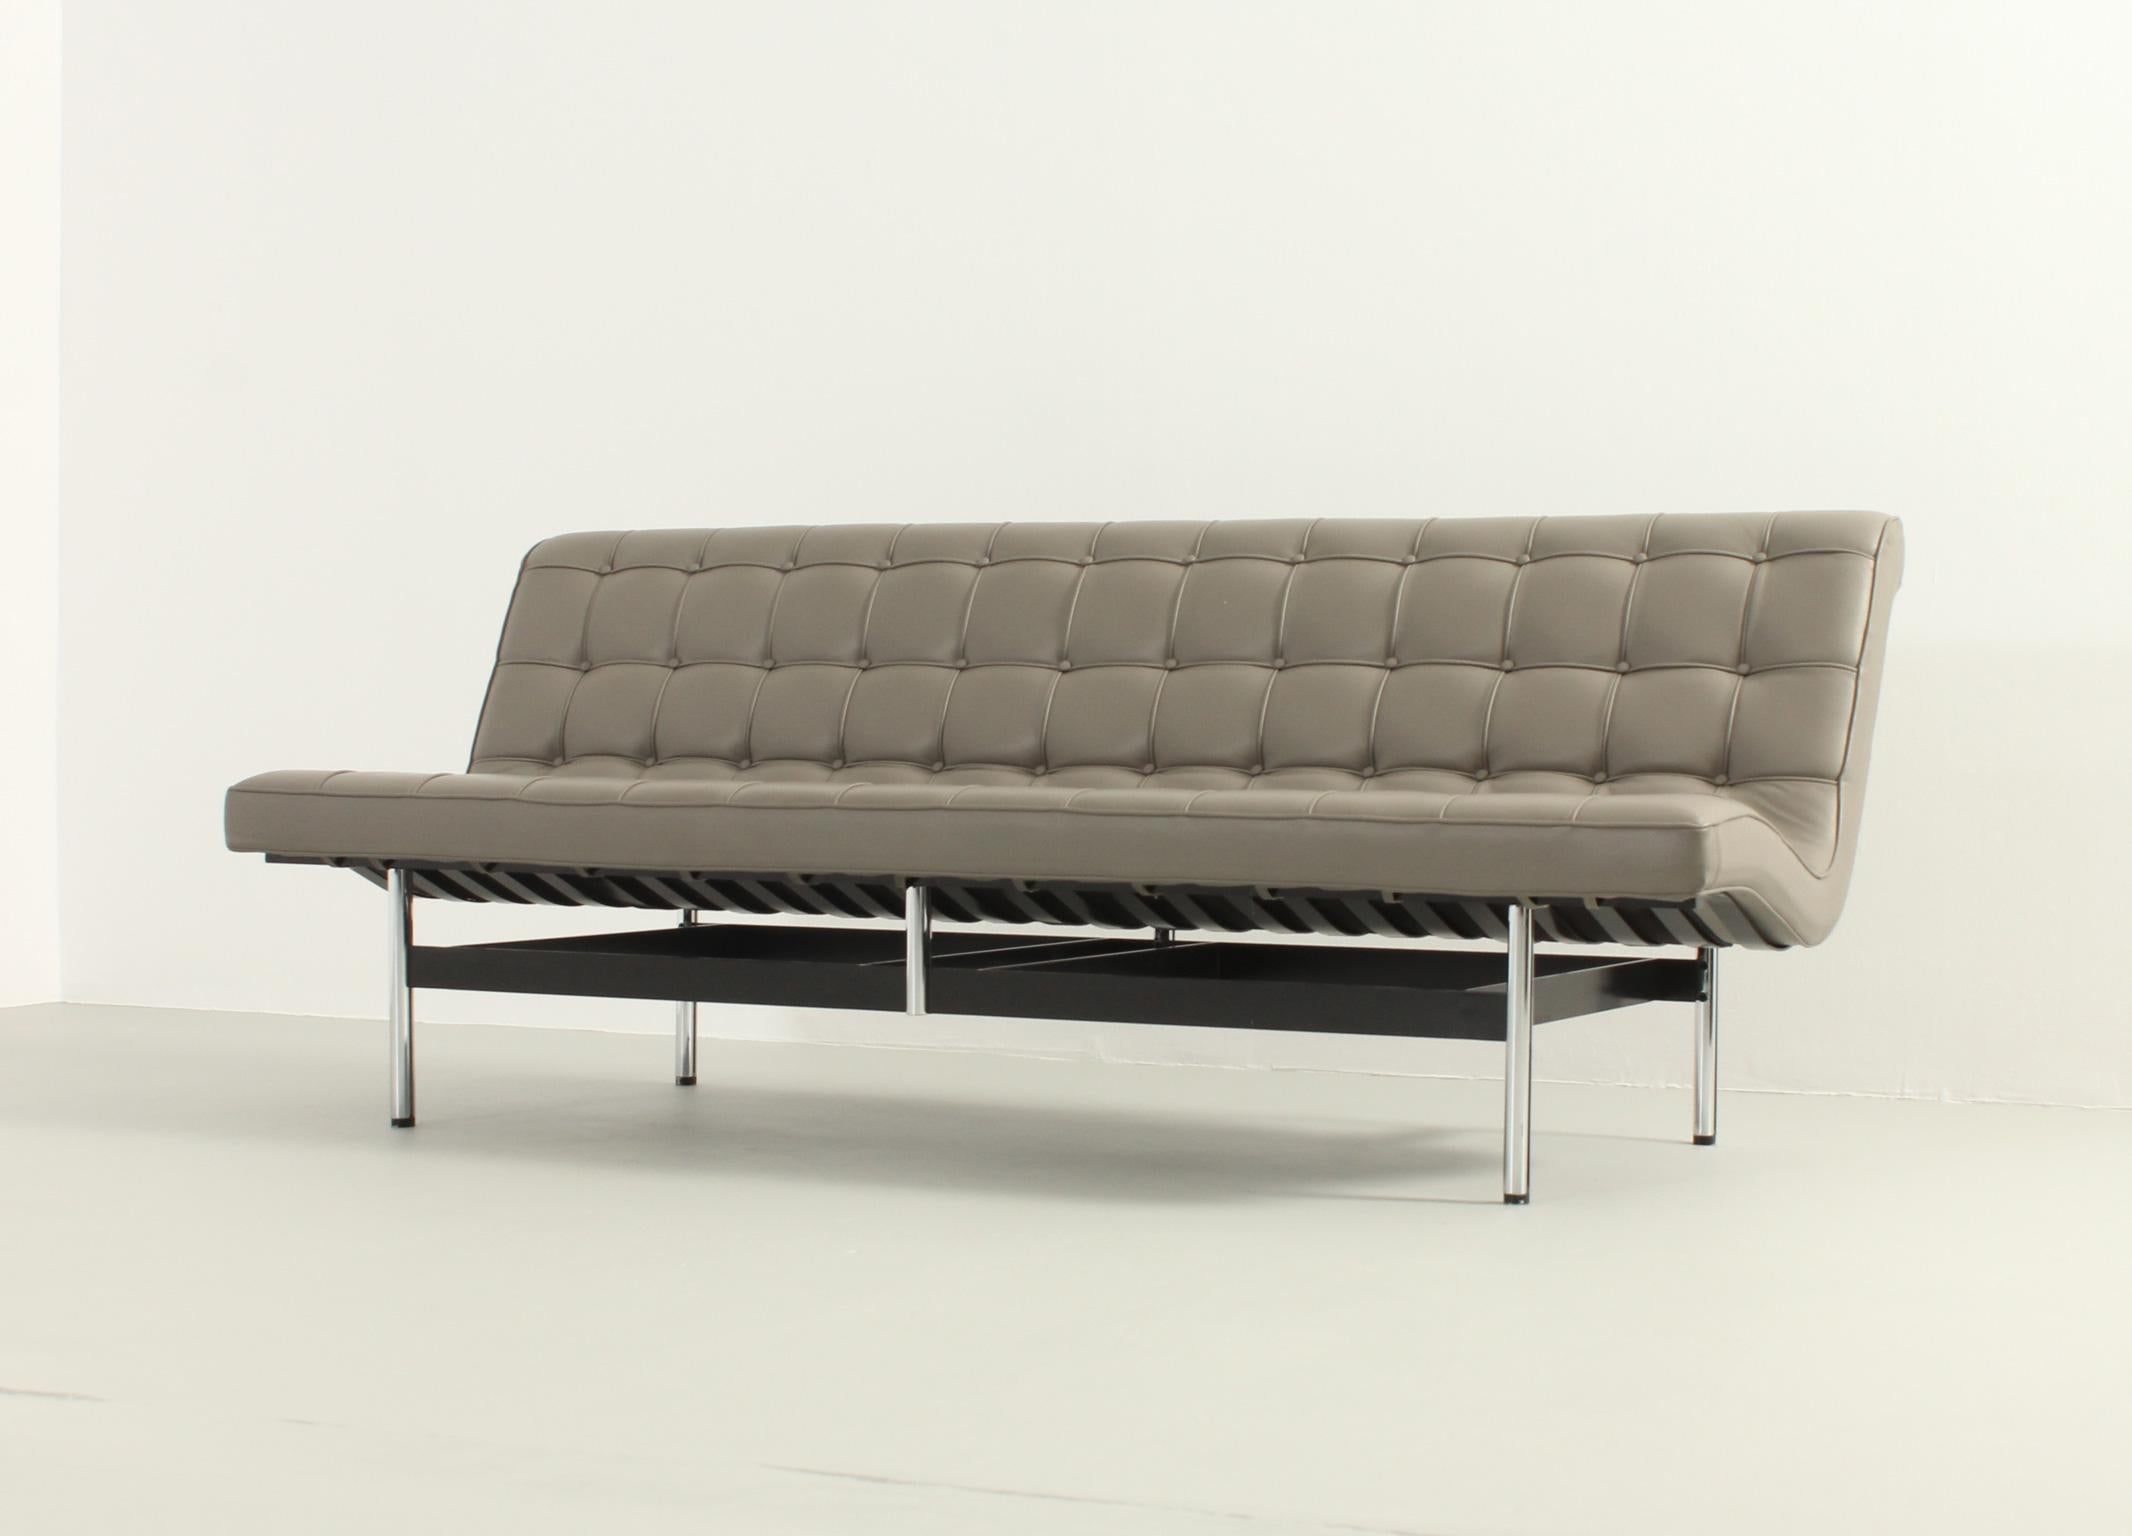 New York sofa originally designed in 1952 by William Katavolos, Ross Littell and Douglas Kelley for Laverne International, USA. This is an edition from 1990's by ICF, Italy. Chromed aluminum and black enamelled steel, original leather upholstery.